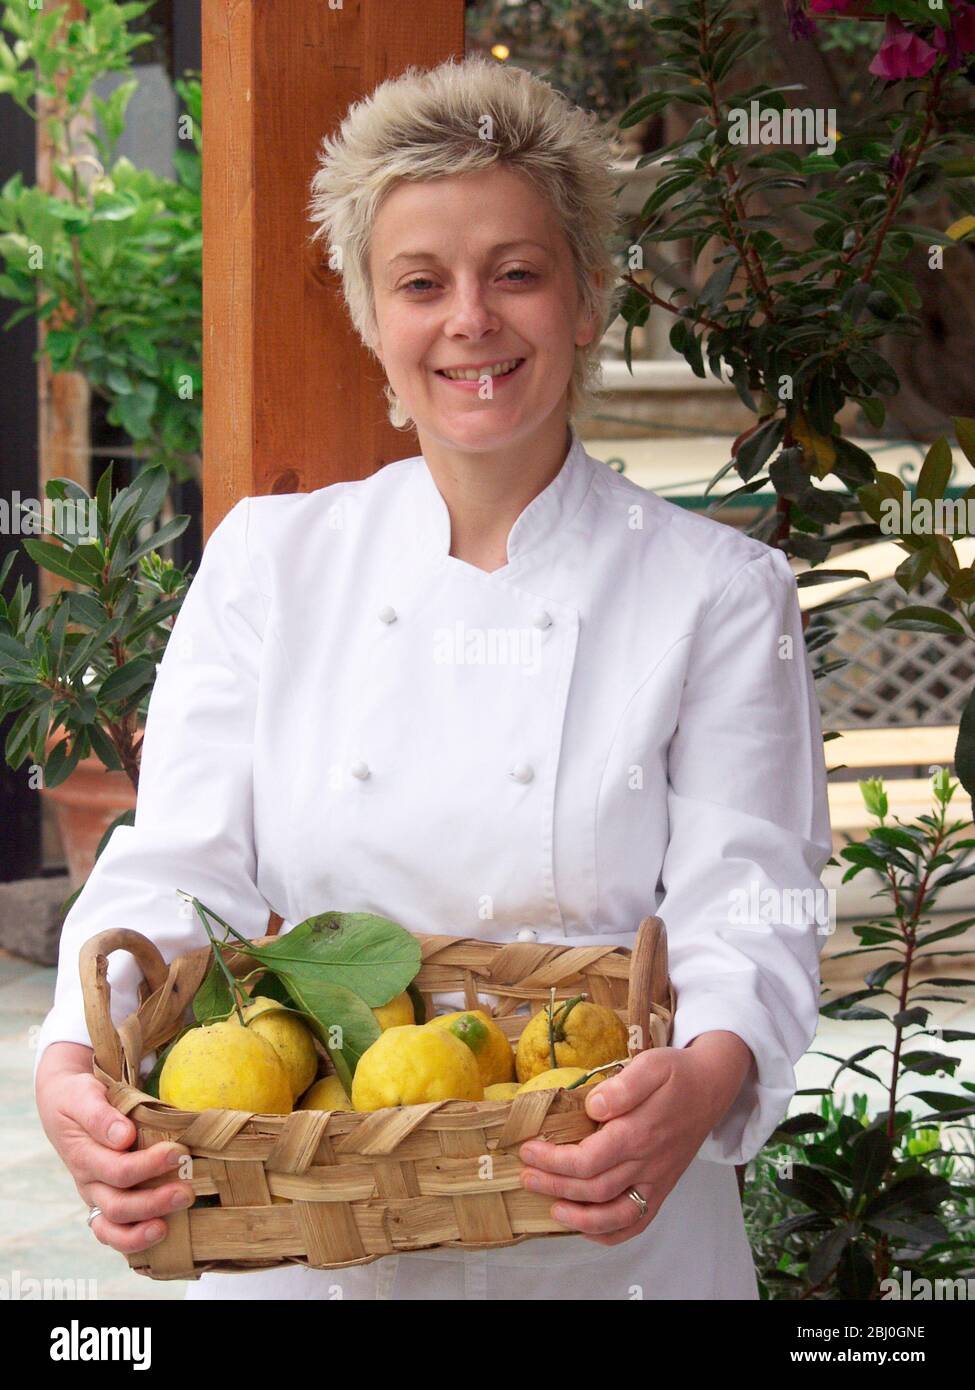 Cookery writer and stylist, Felicity Barnum-Bobb in Italy with basket of Italian fresh produce - Stock Photo